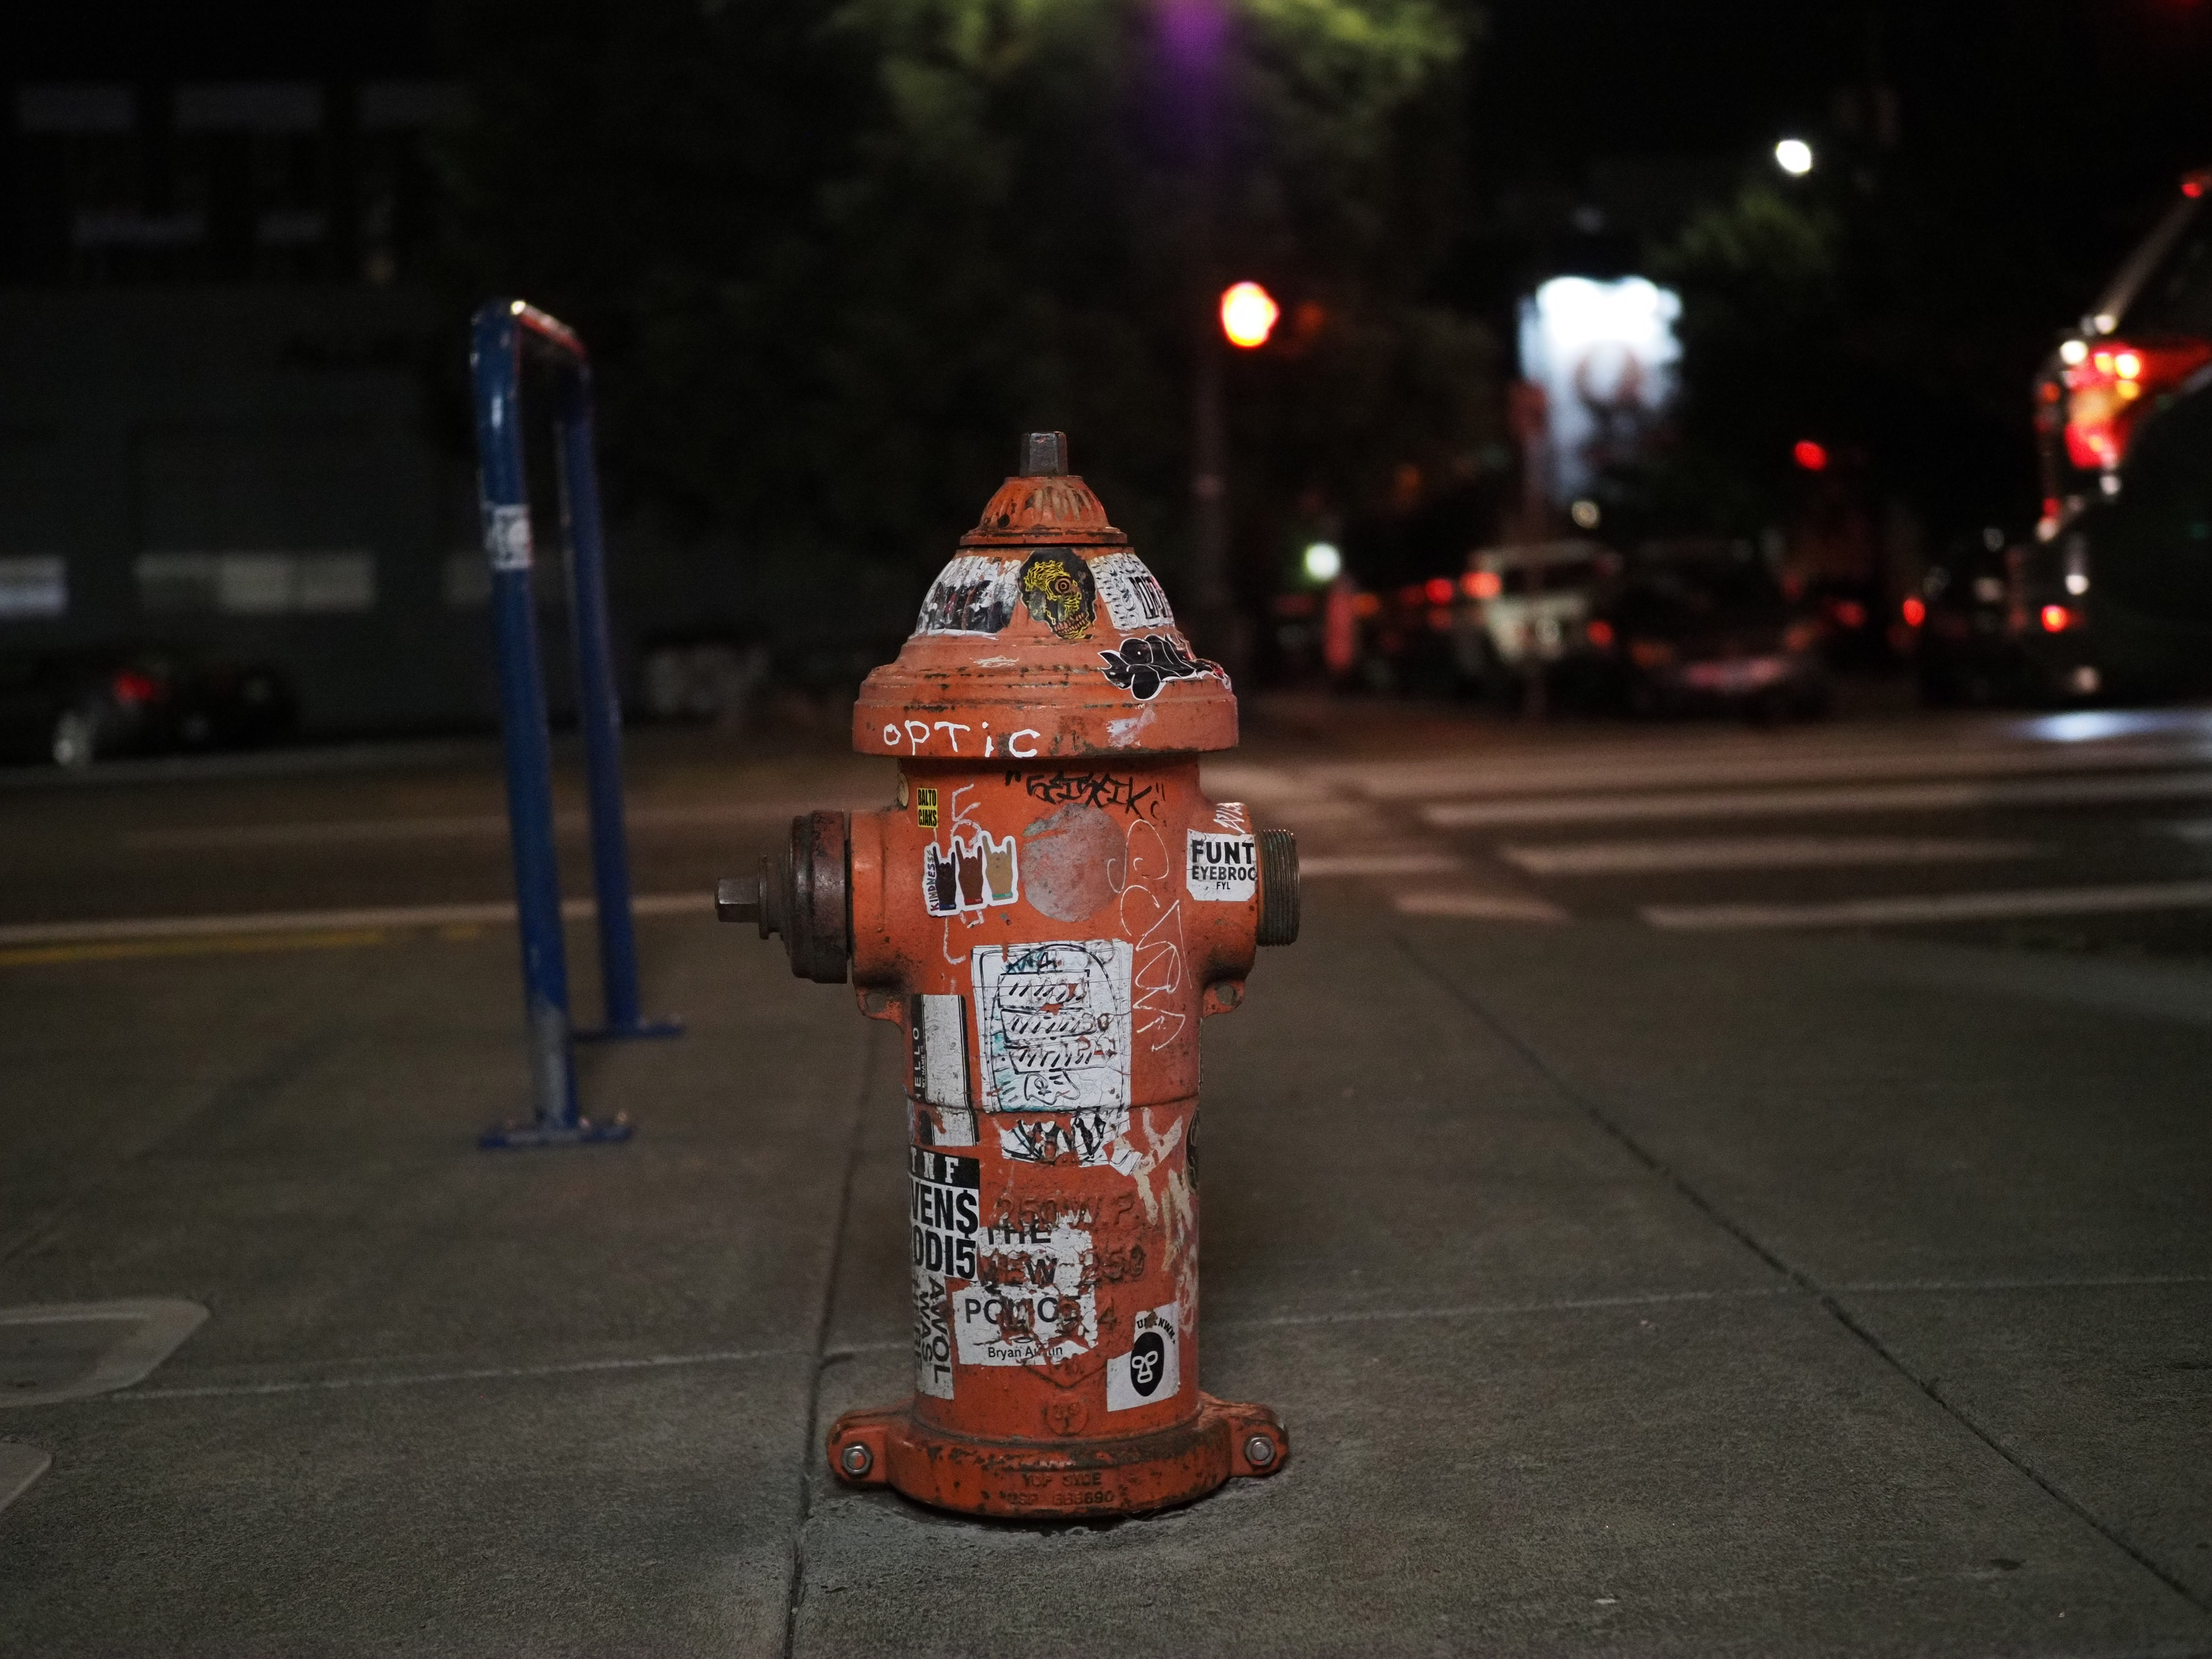 Even fire hydrants are not safe from Portland denizens' sticker game!